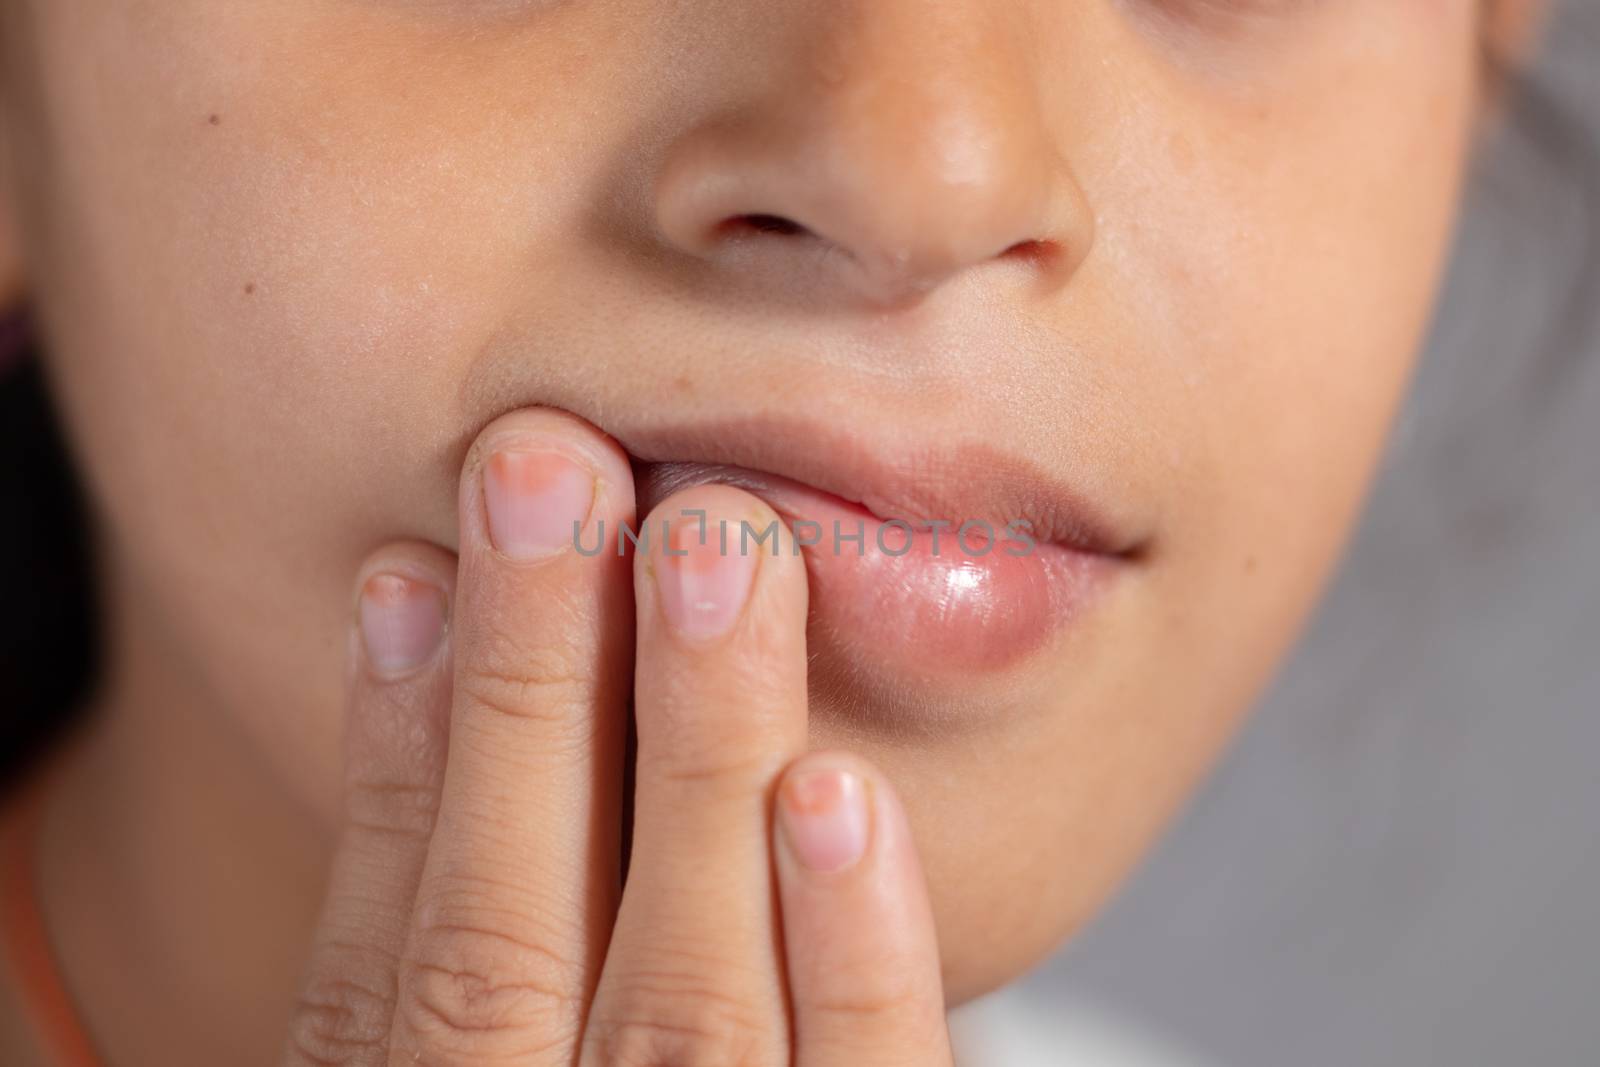 Extreme close up of child touch's her mouth - concept showing to prevent and Avoid touching your Mouth. Protect from COVID-19 or coronavirus spreading or outbreak - Don t Touch Your mouth